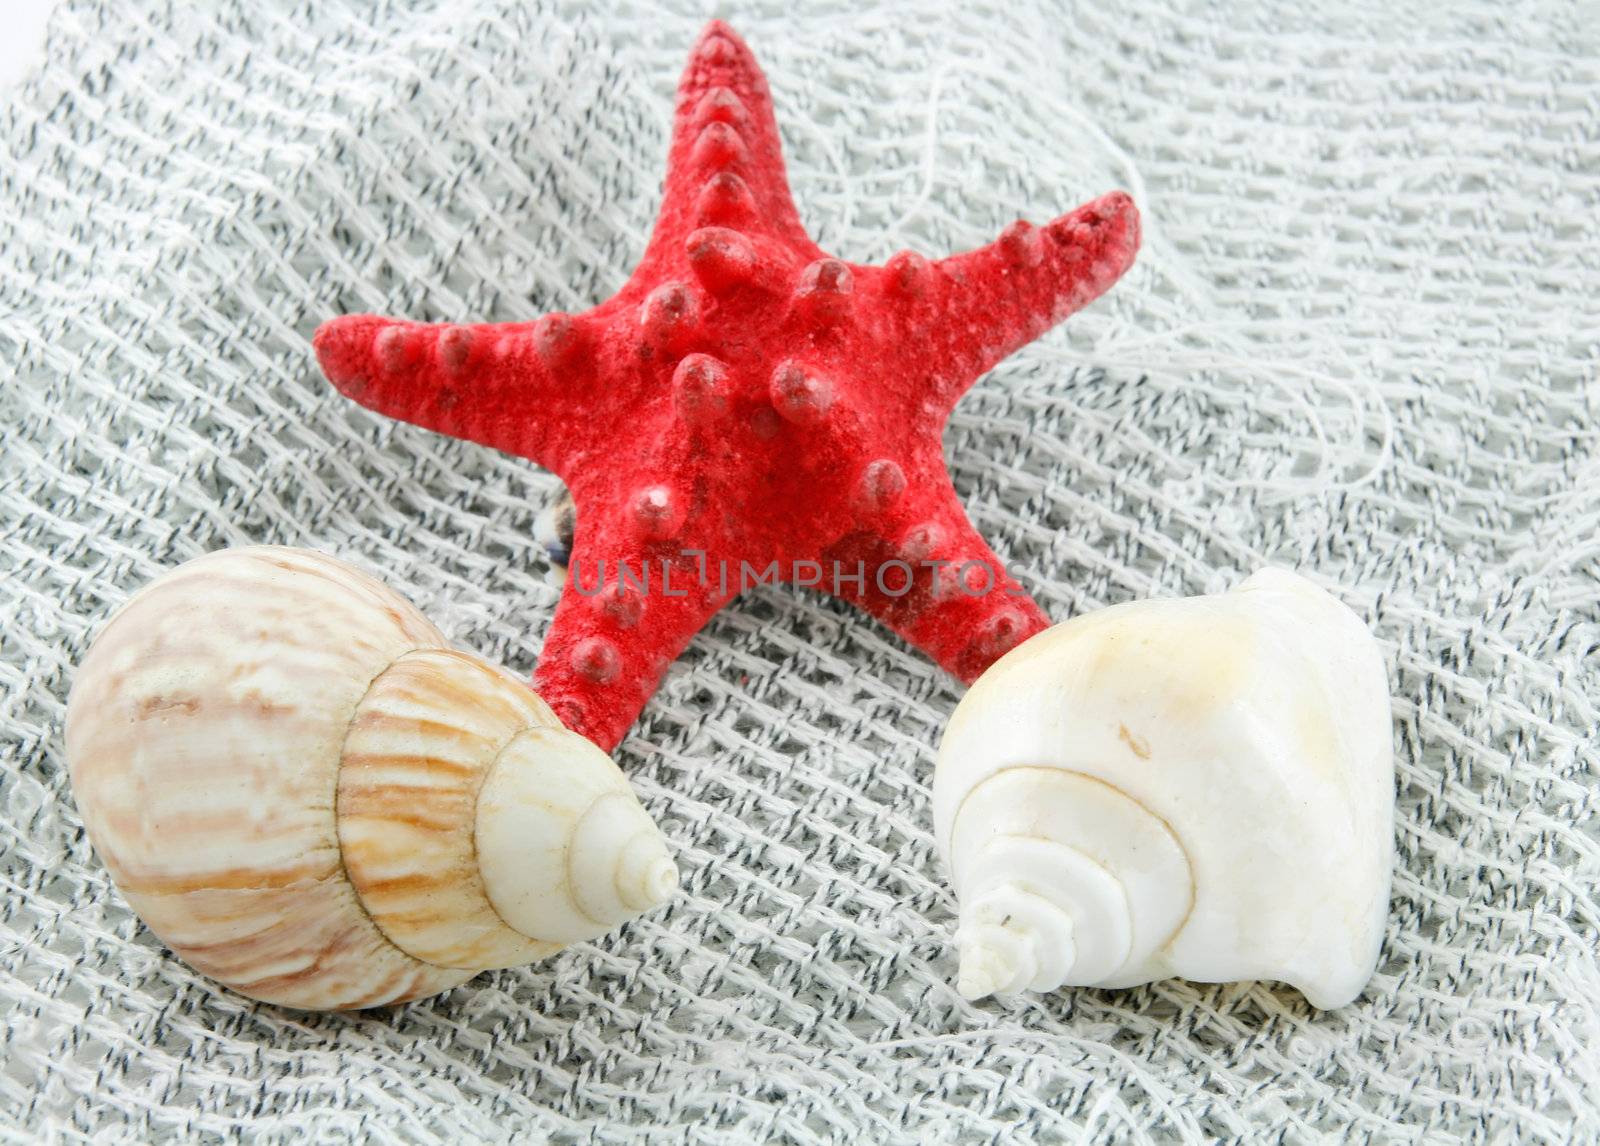 Colored Seashell (Starfish and Scallop) on a Fishing Net Background